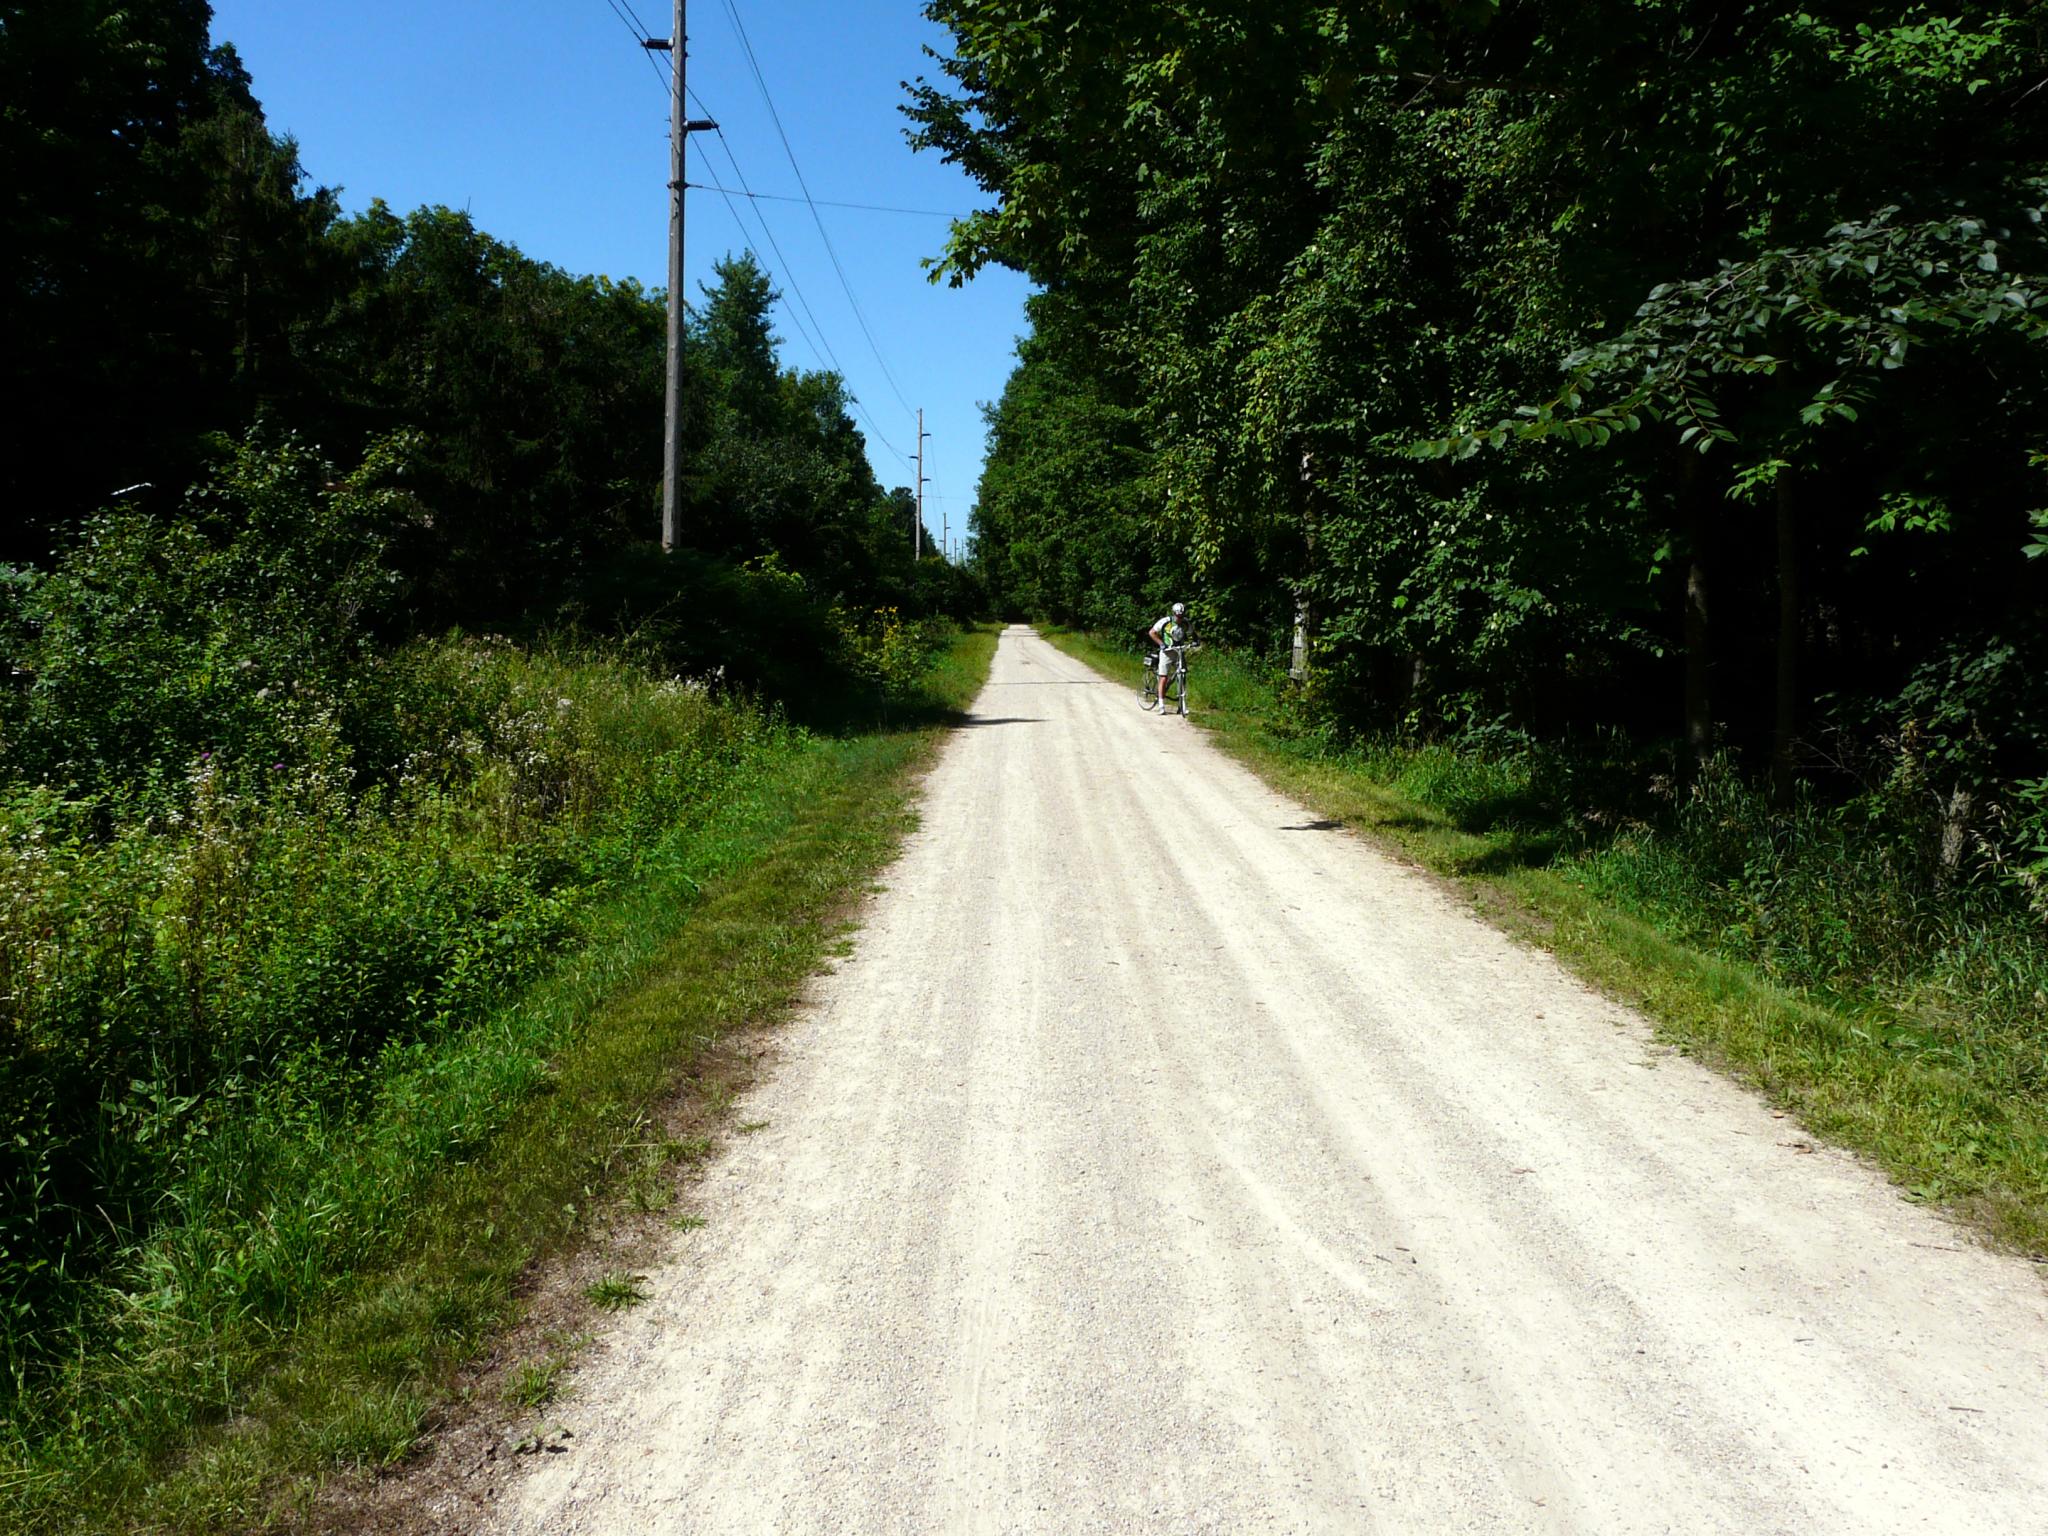 a road near many trees and bushes with two people standing on the side